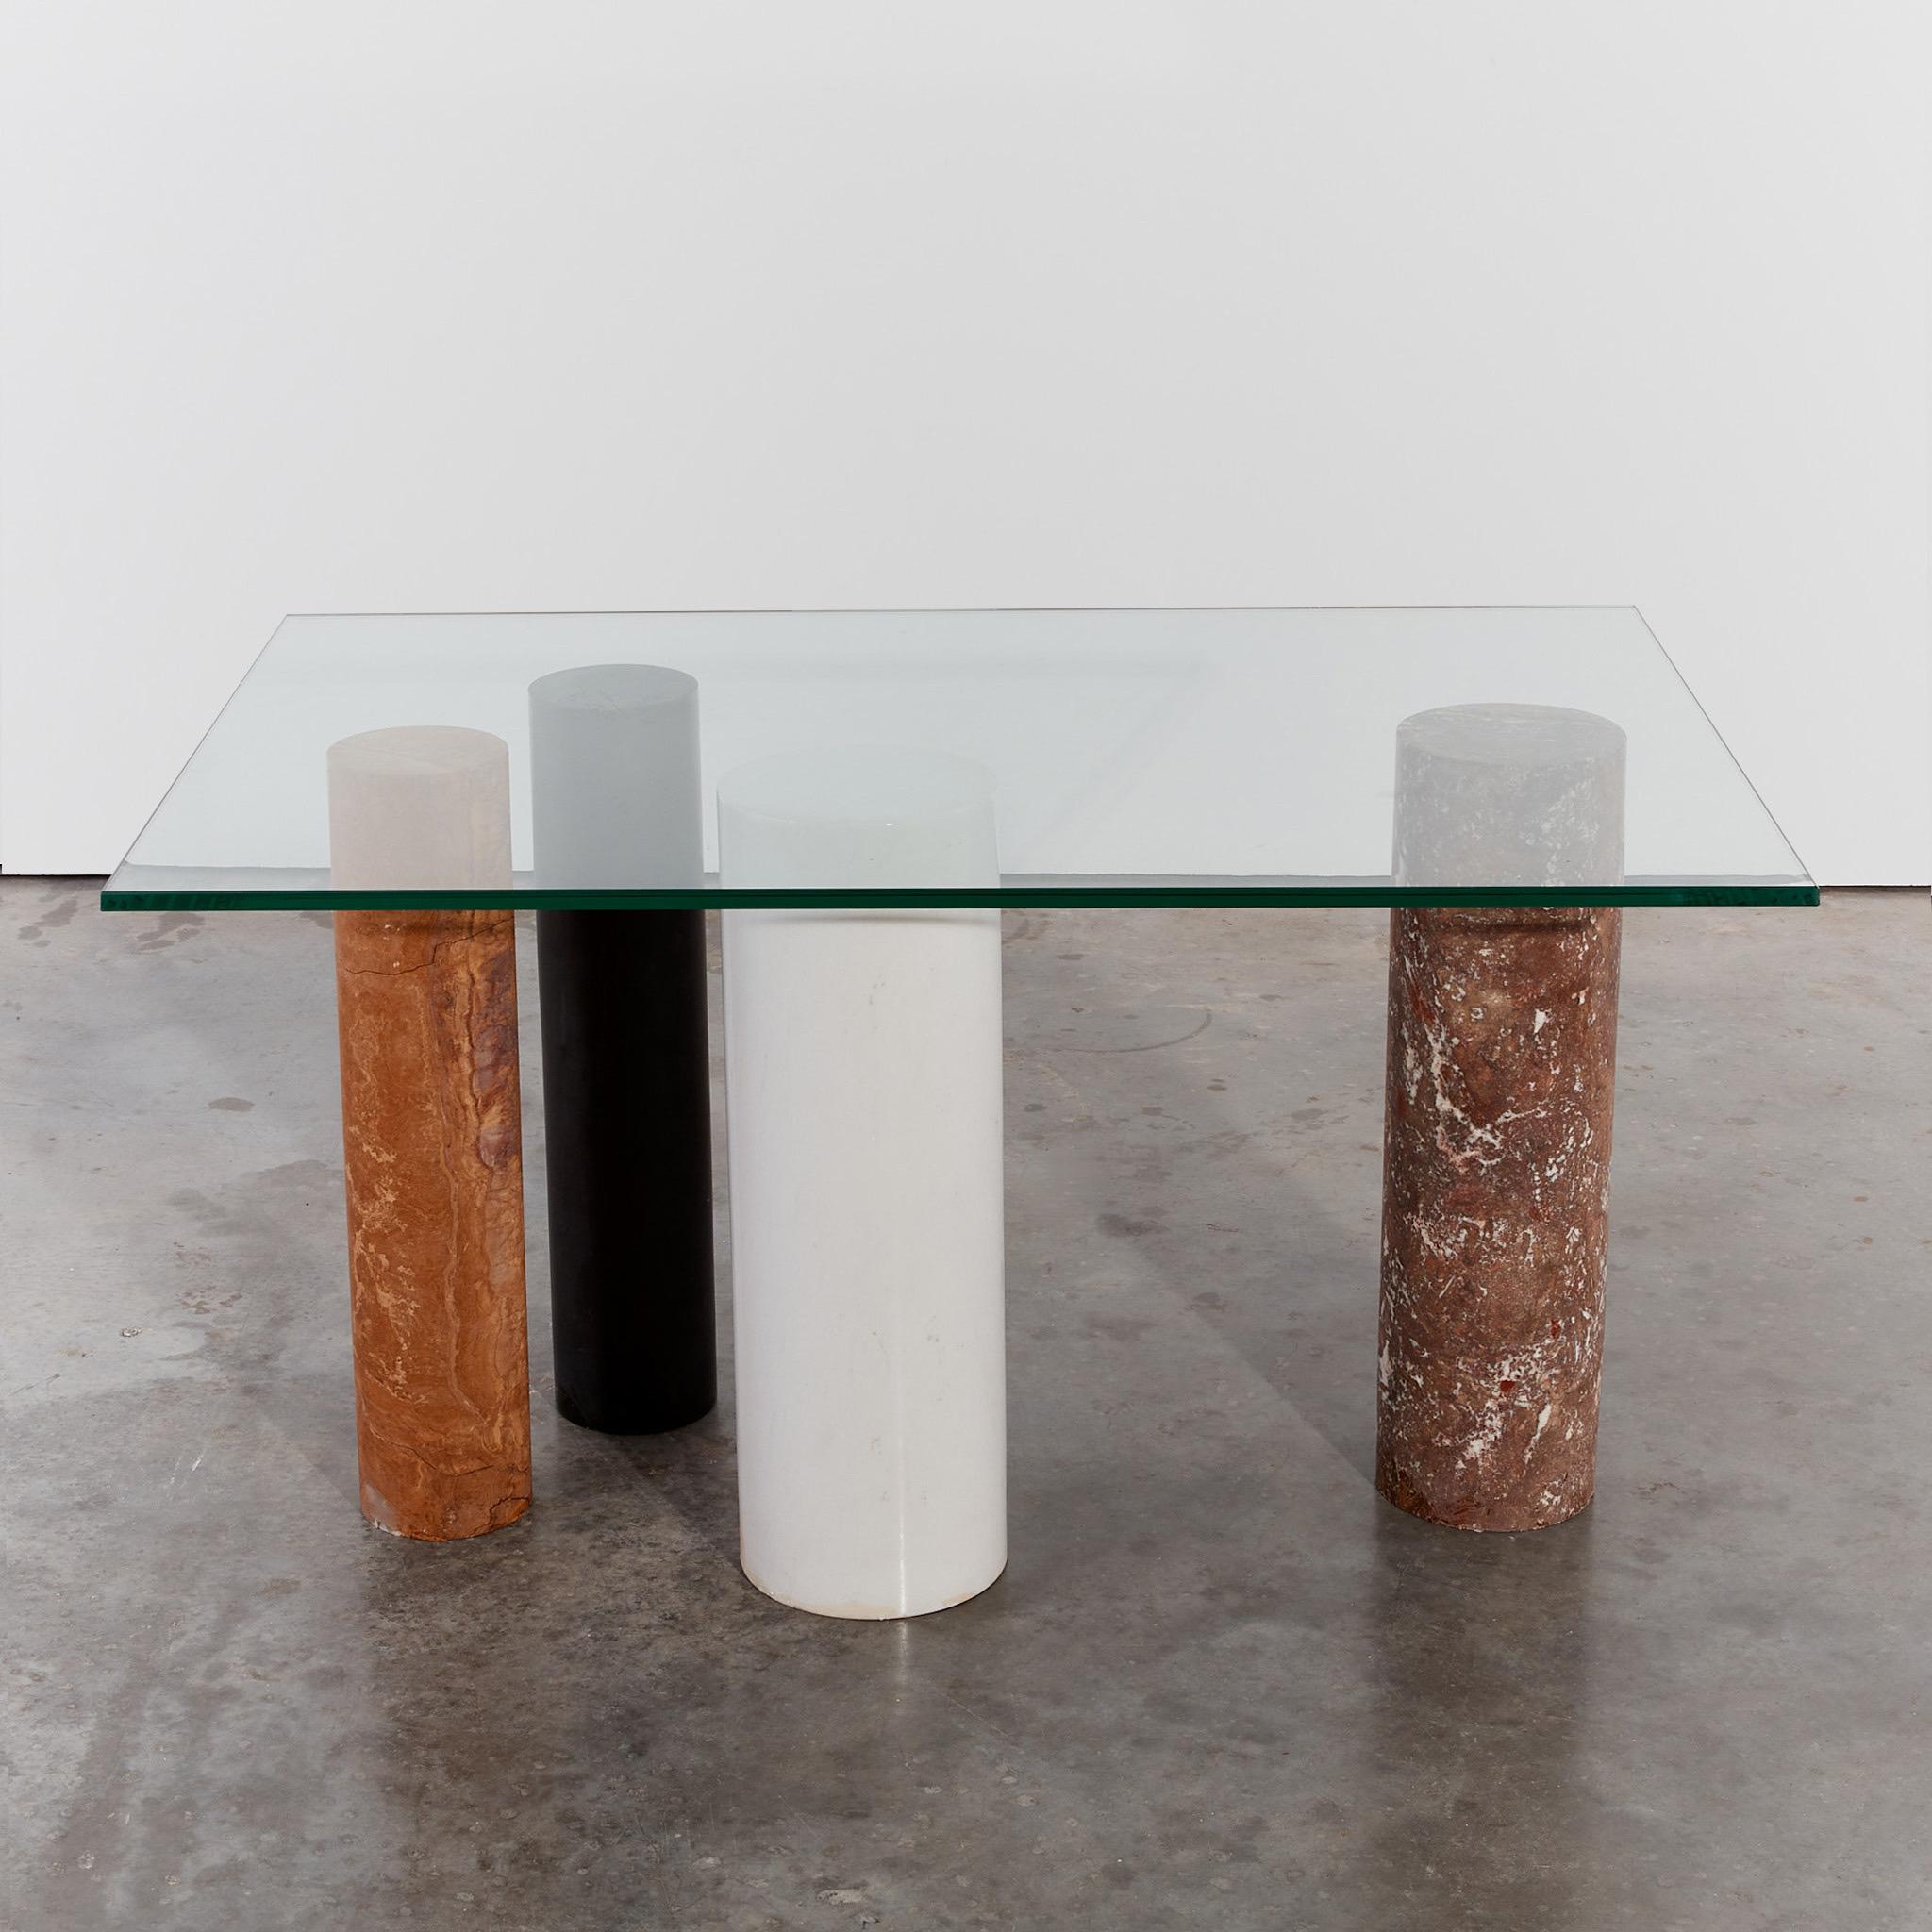 Rare Up&Up console with four marble columns, each in different coloured statement marble that can be arranged to suit.

Founded in 1969 and specialising in marble, Italian manufacturers Up&Up (now known as 'Up Group') have collaborated with some